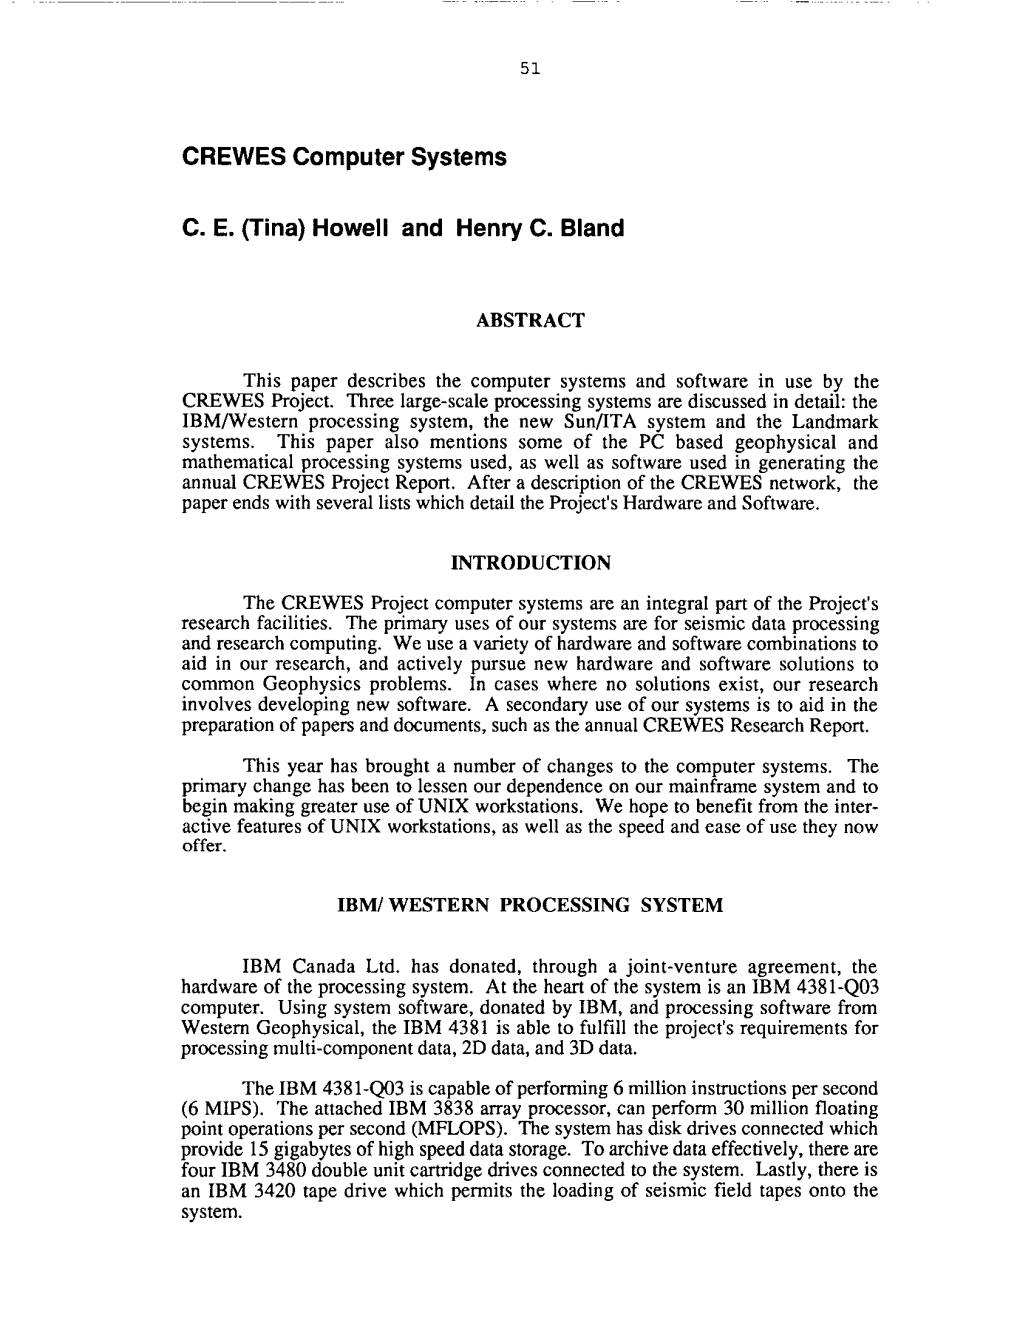 Documents, Such As the Annual CREWES Research Report